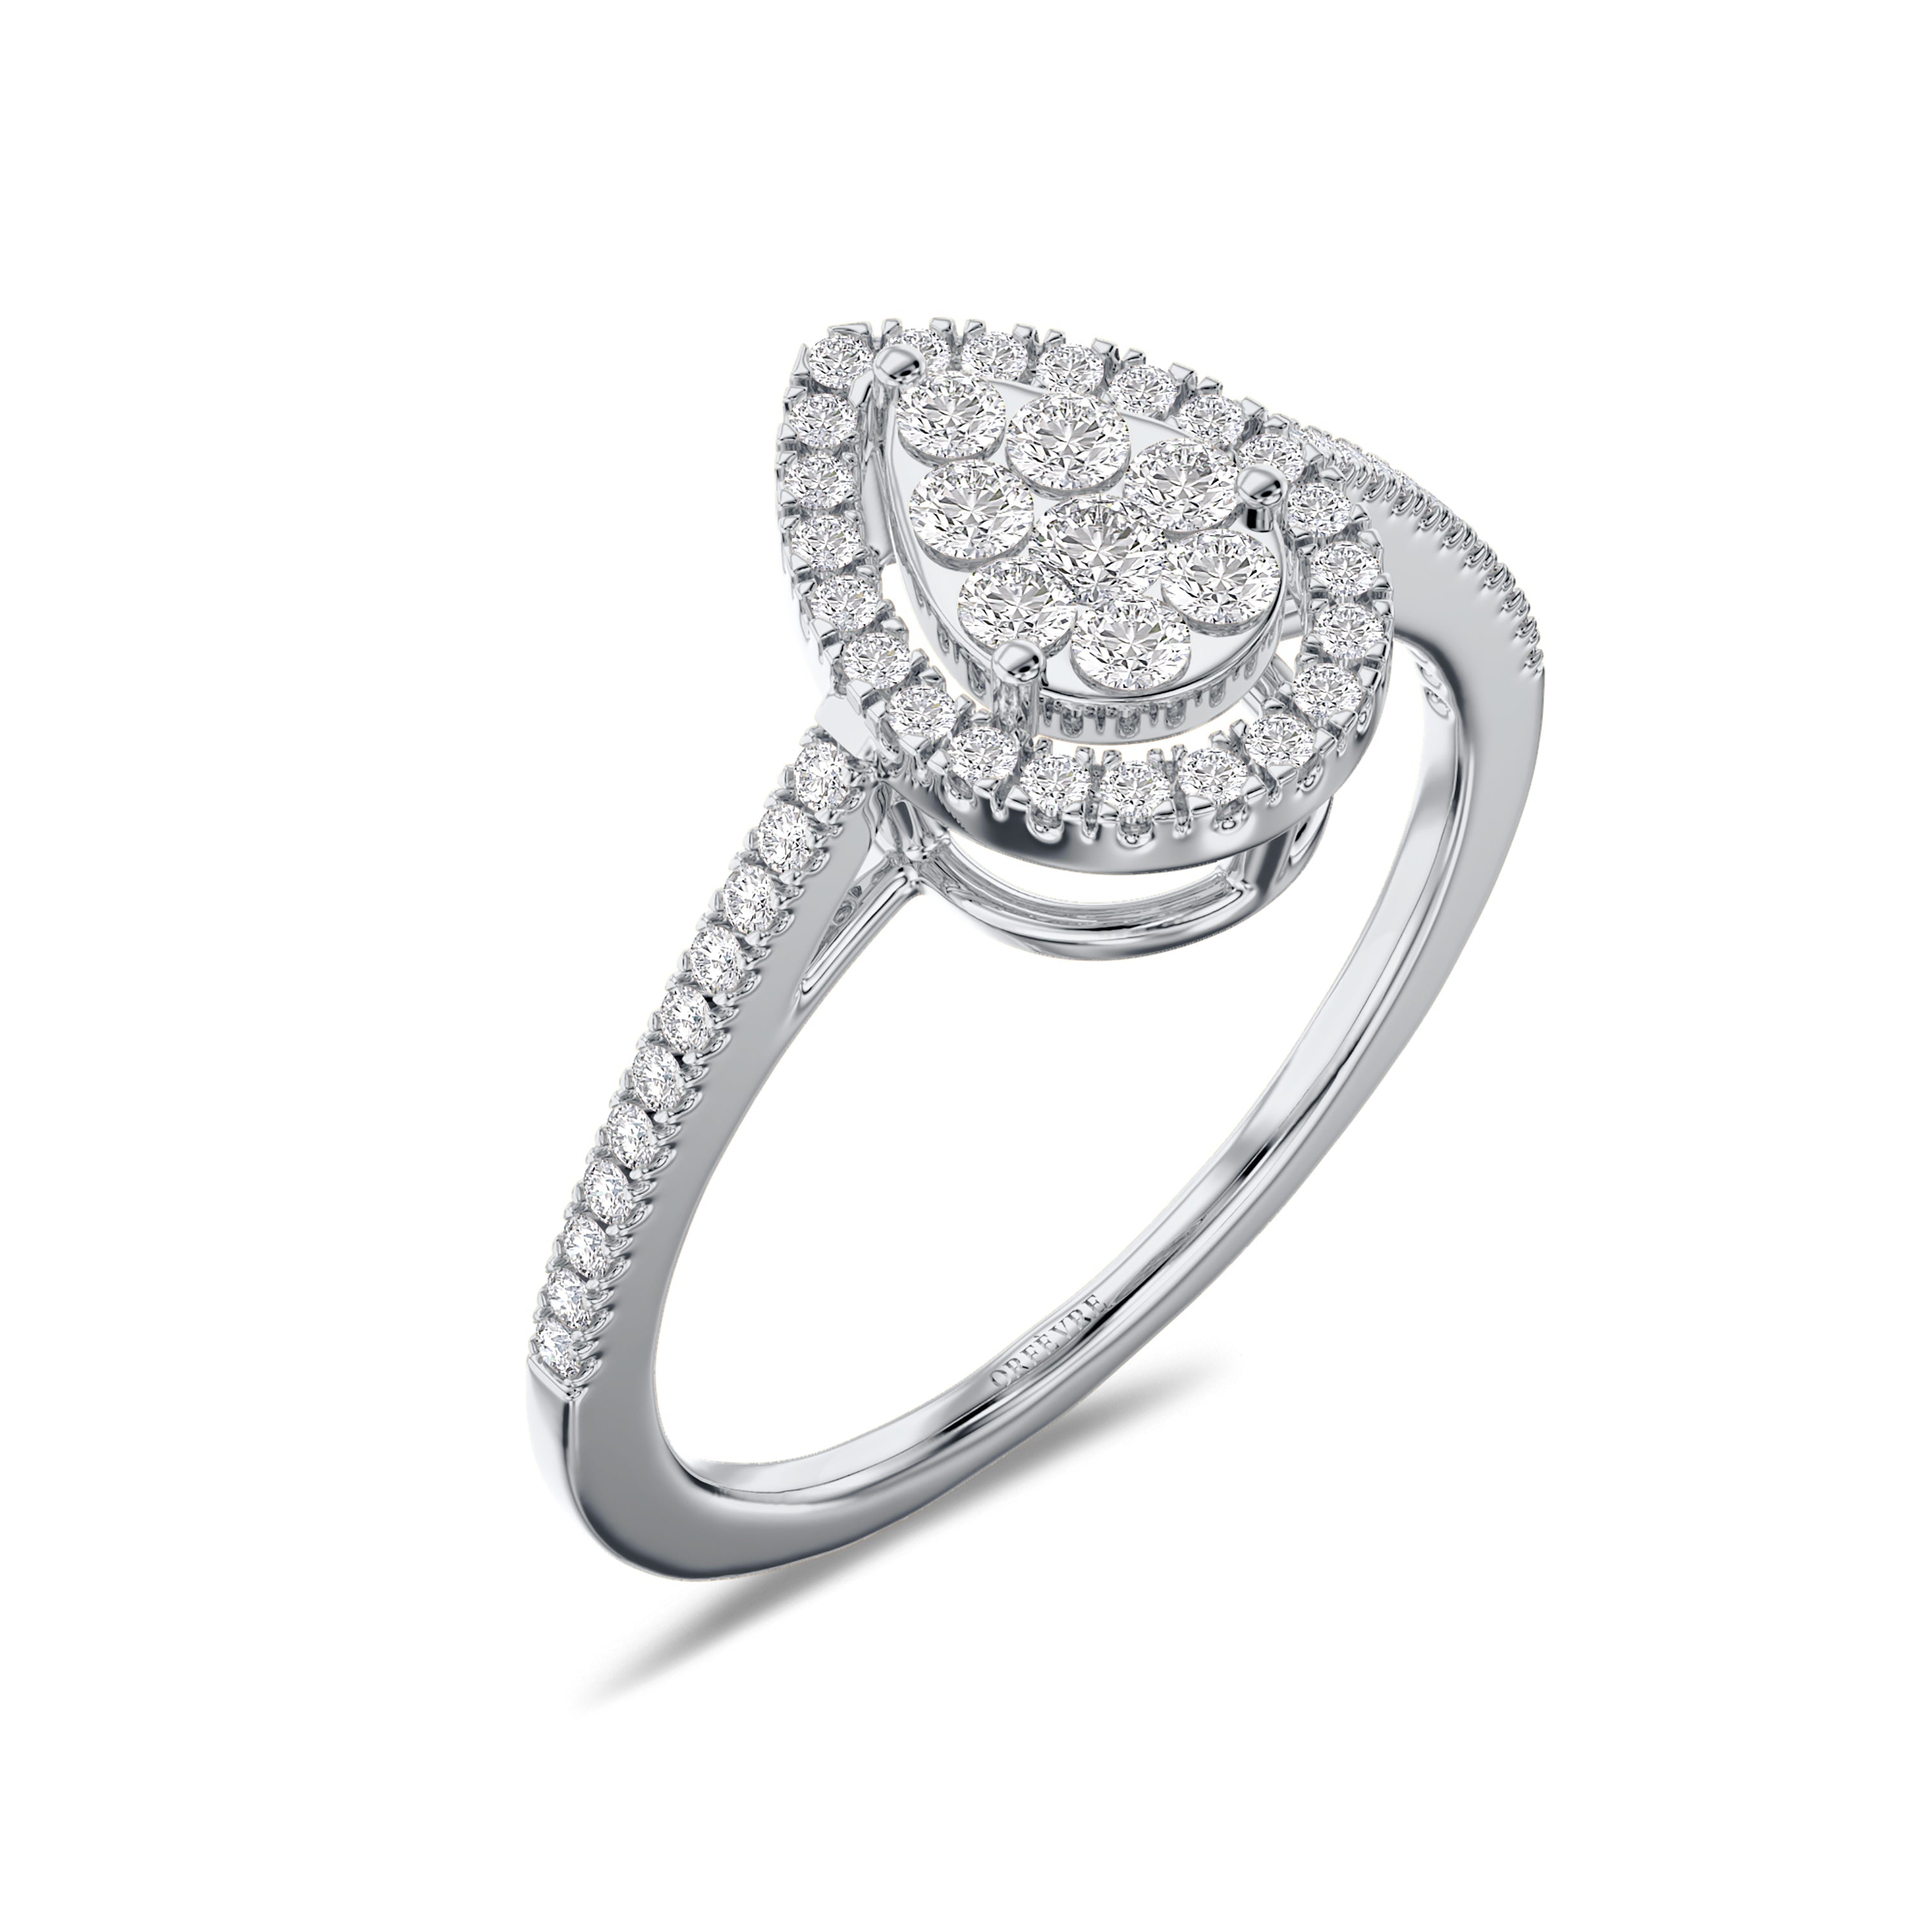 18K pear shaped diamond ring white gold in 0.4 carat, FG color and SI clarity